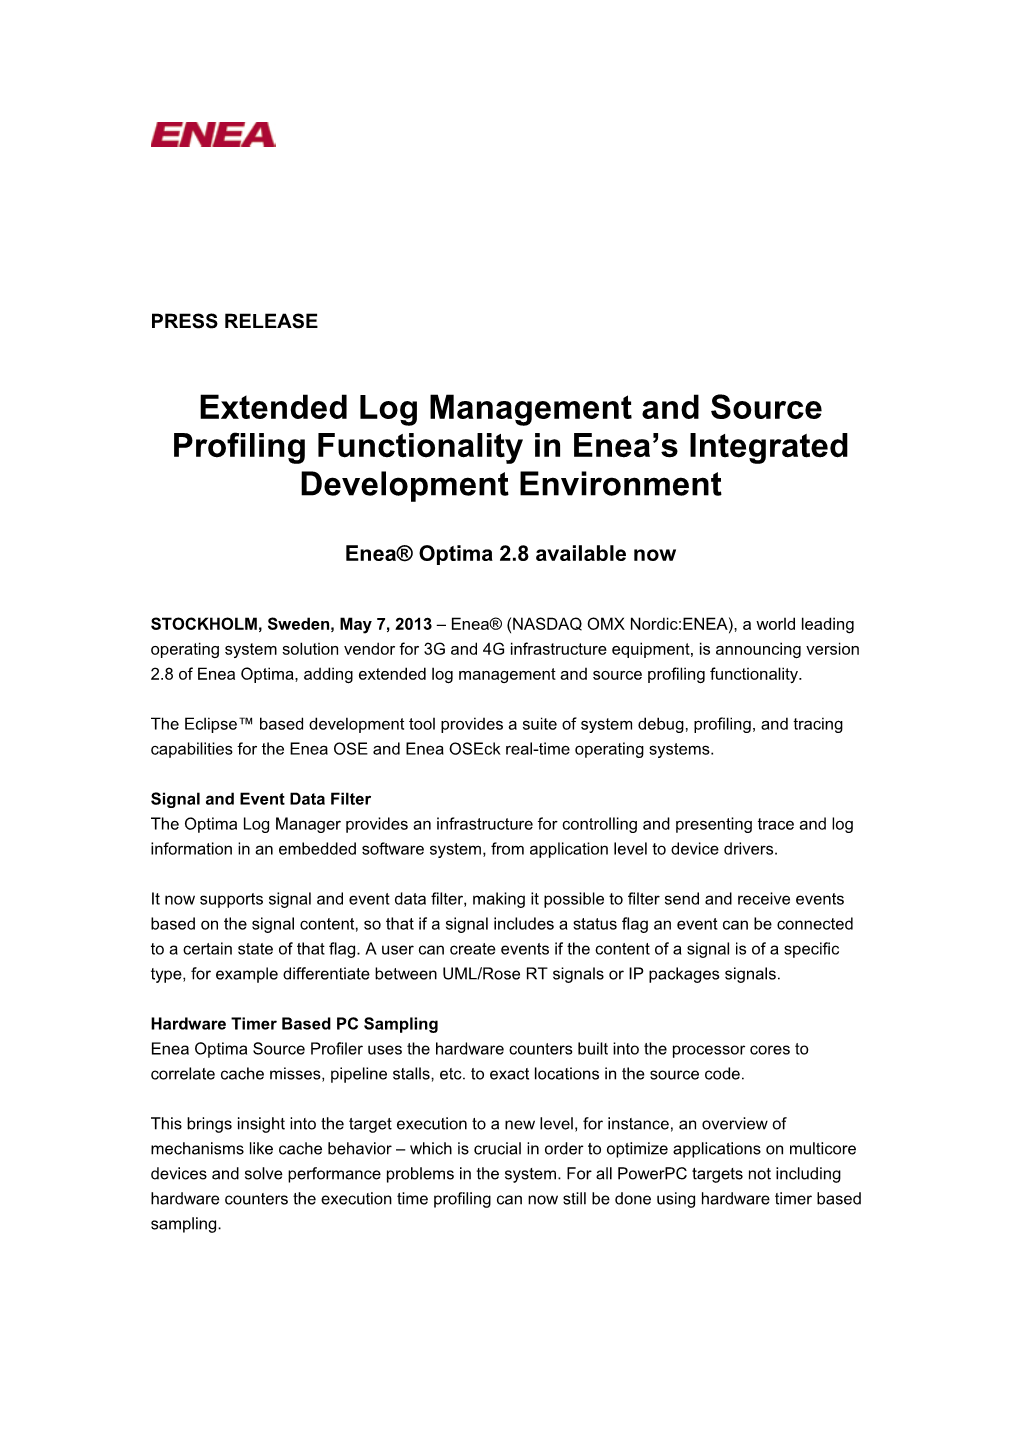 Extended Log Management and Source Profiling Functionality in Enea’S Integrated Development Environment